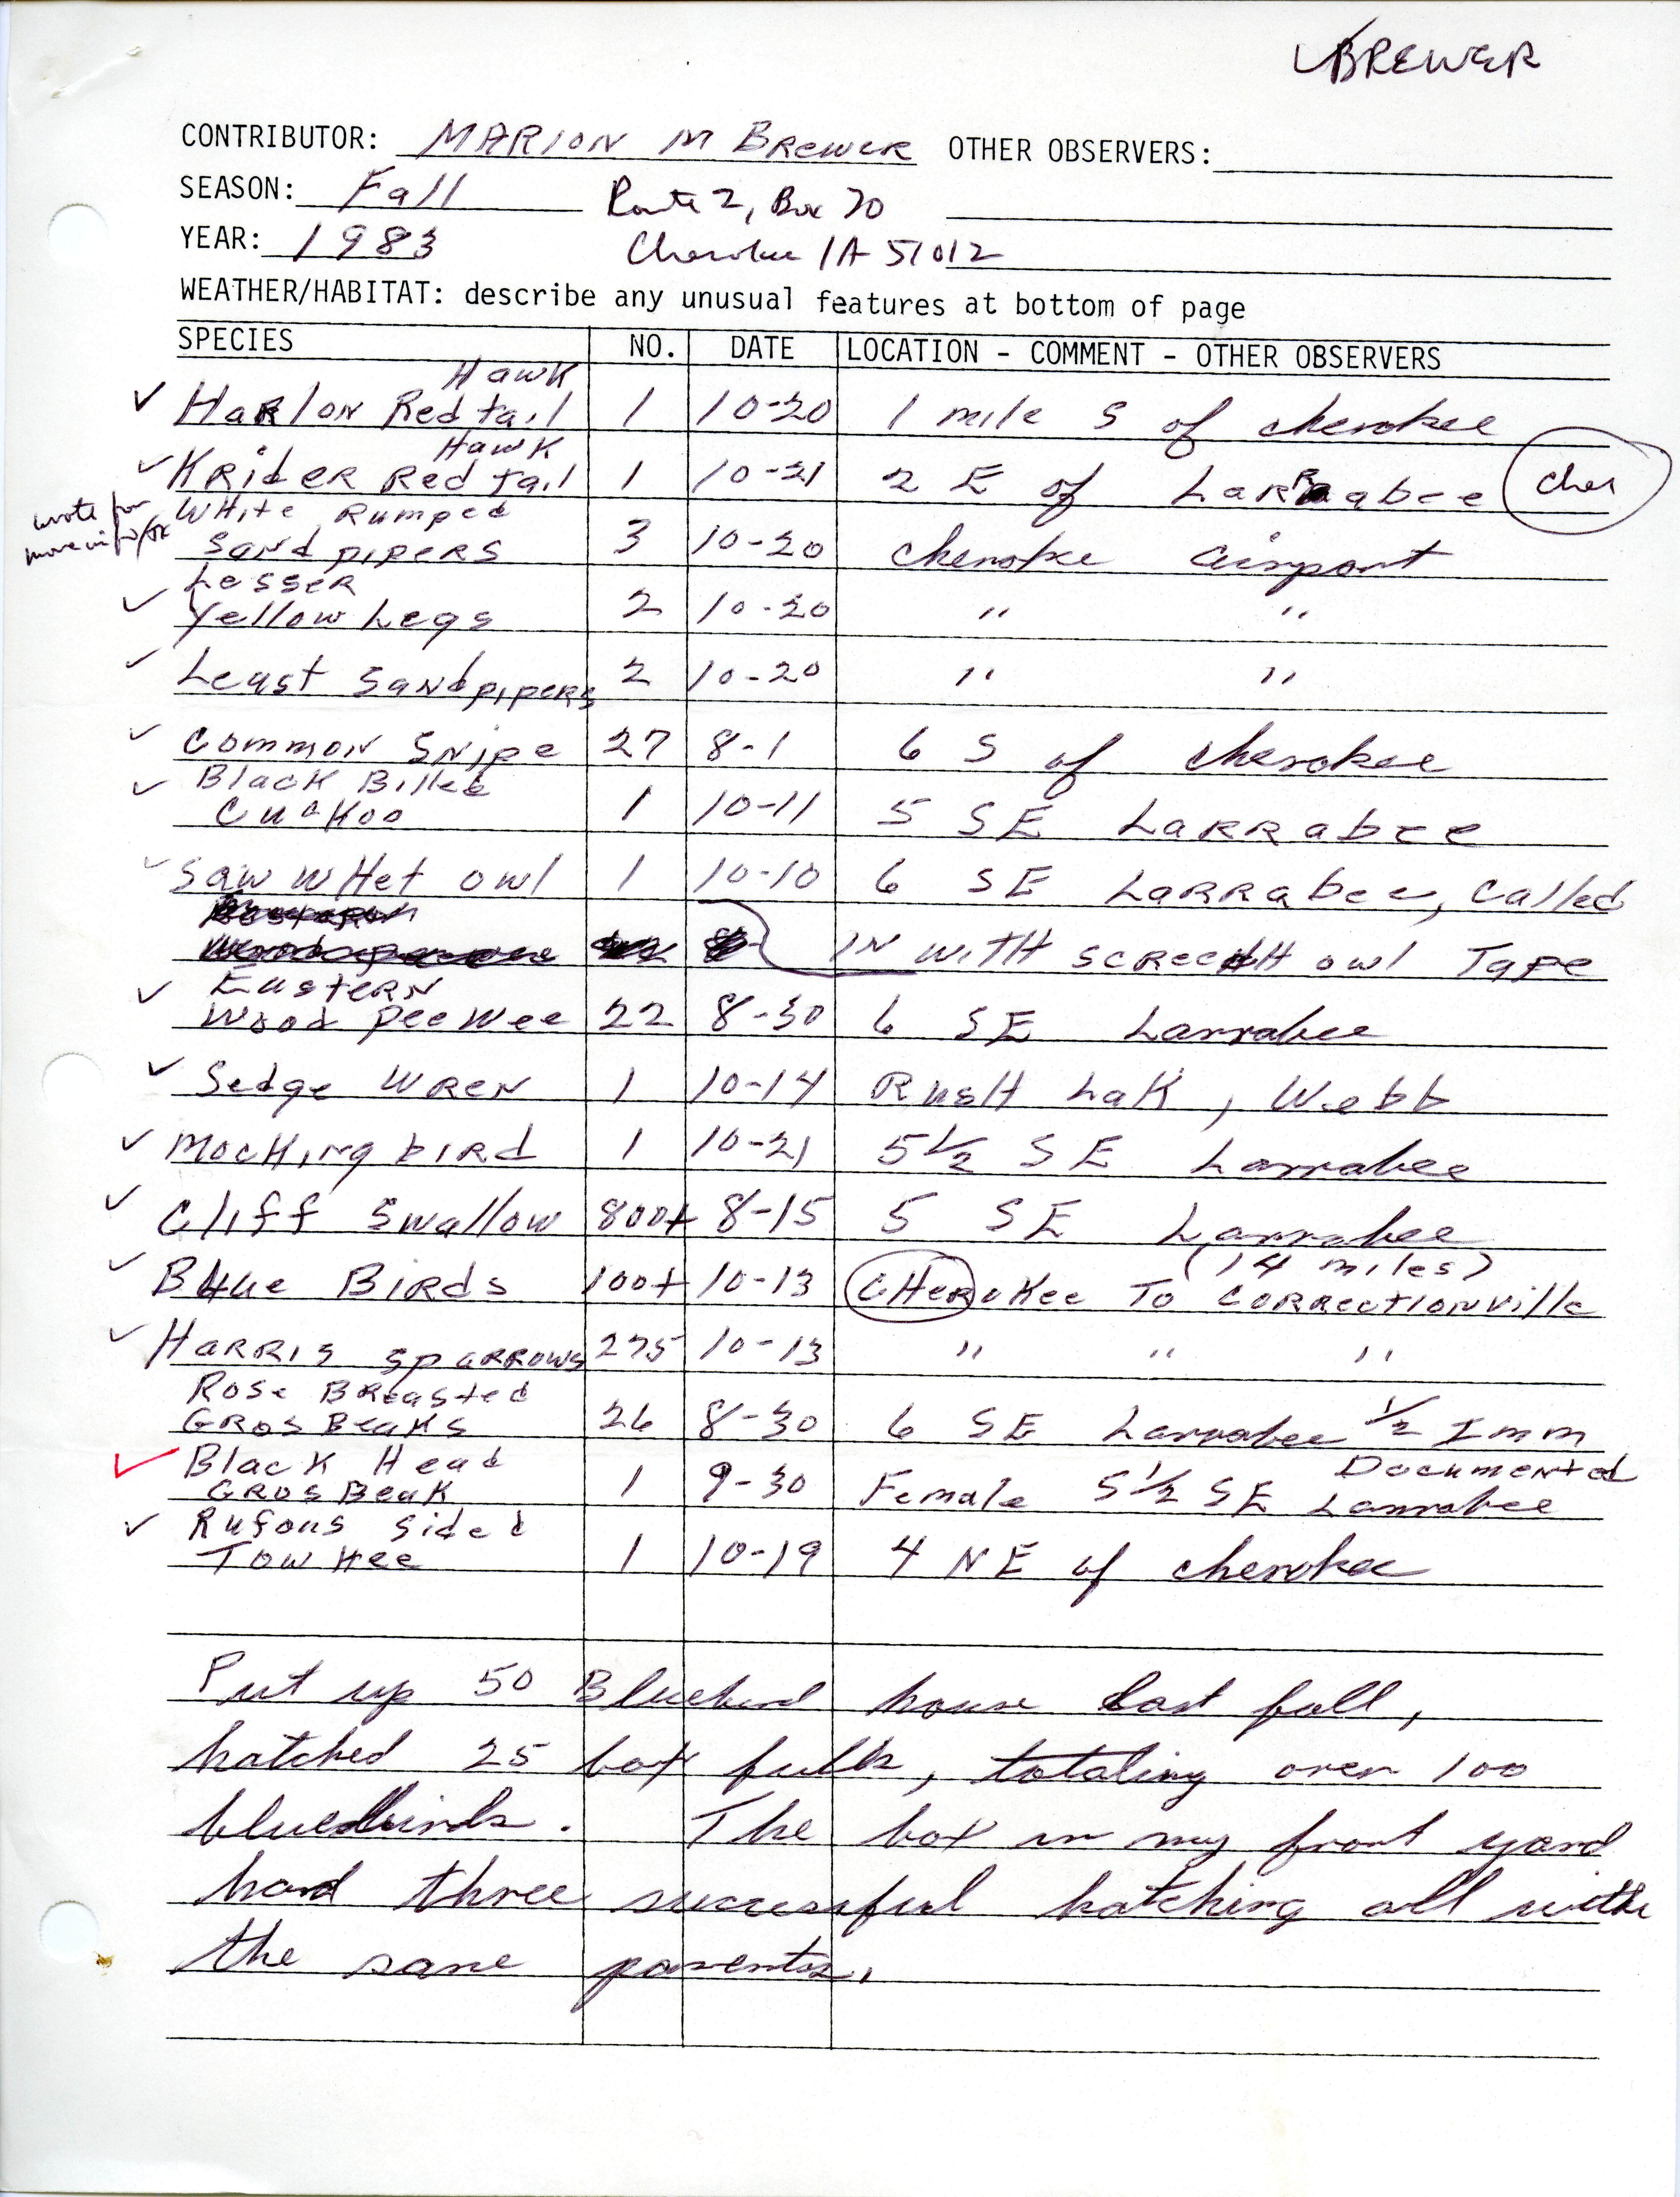 Annotated bird sighting list for fall 1983 compiled by Marion Brewer